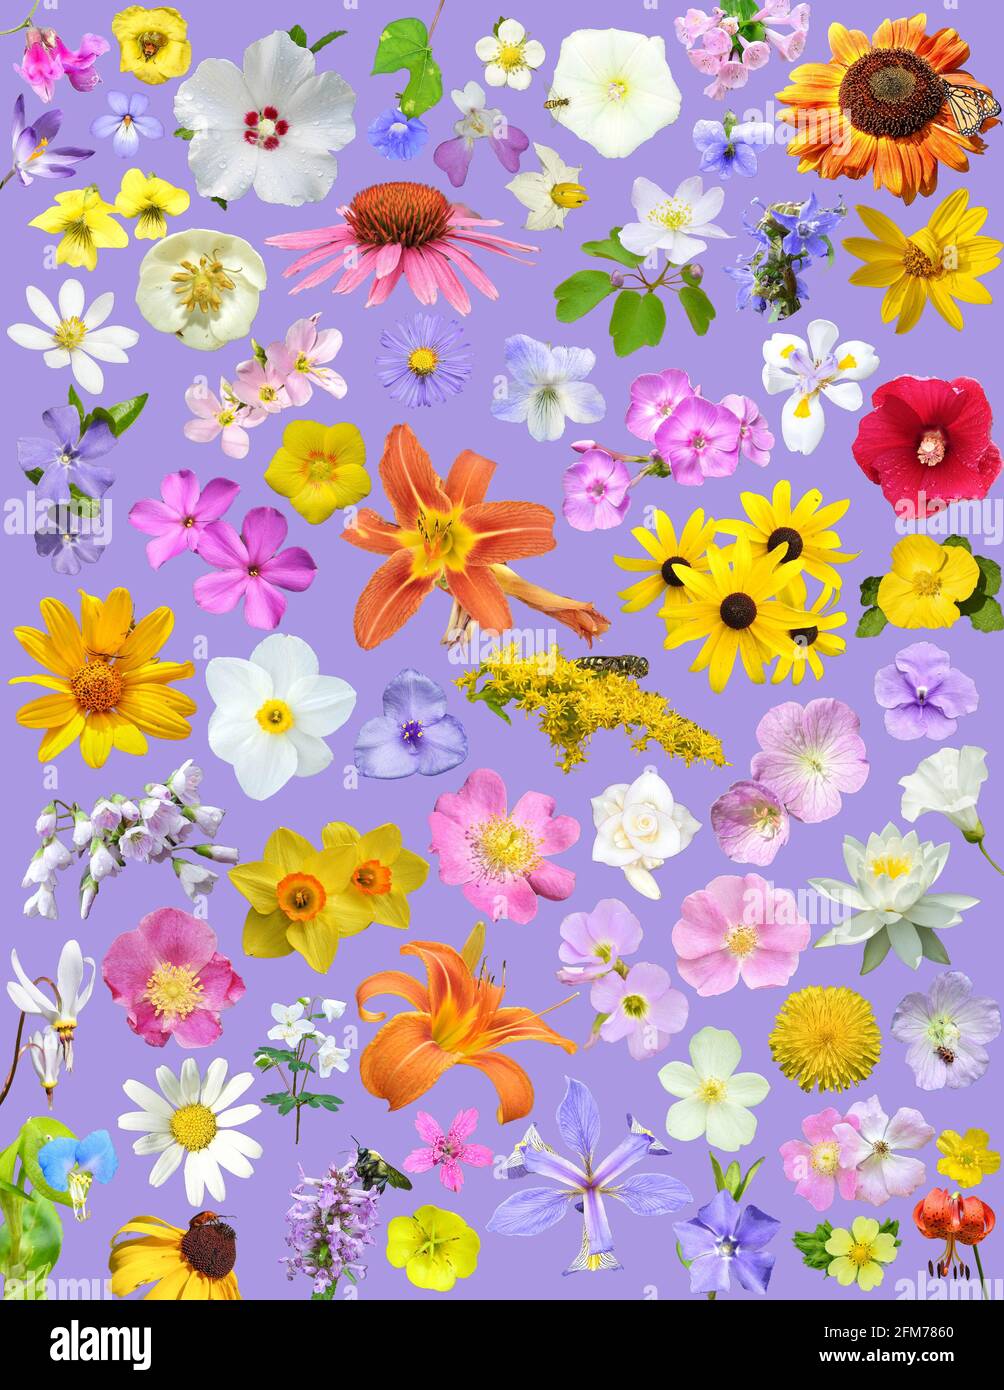 Nature Collage of a Variety of Flowers On Solid Color Background Including  Daisies, Hibiscus, Sunflowers, Lilies, Daffodils, Roses, Violets, and More  Stock Photo - Alamy